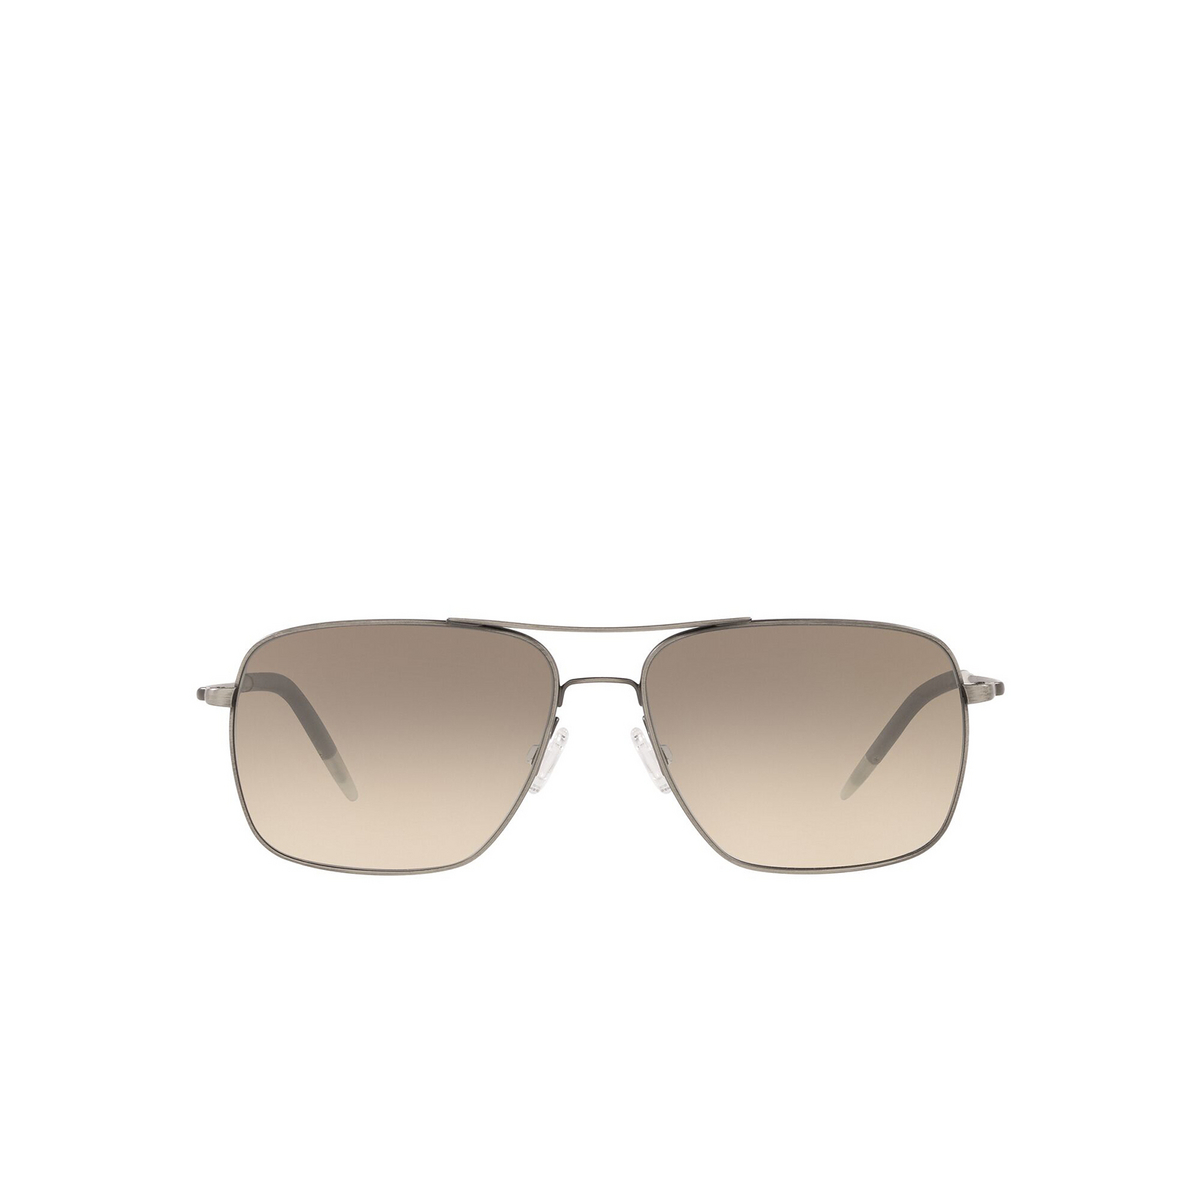 Oliver Peoples® Rectangle Sunglasses: Clifton OV1150S color Antique Pewter 528932 - front view.